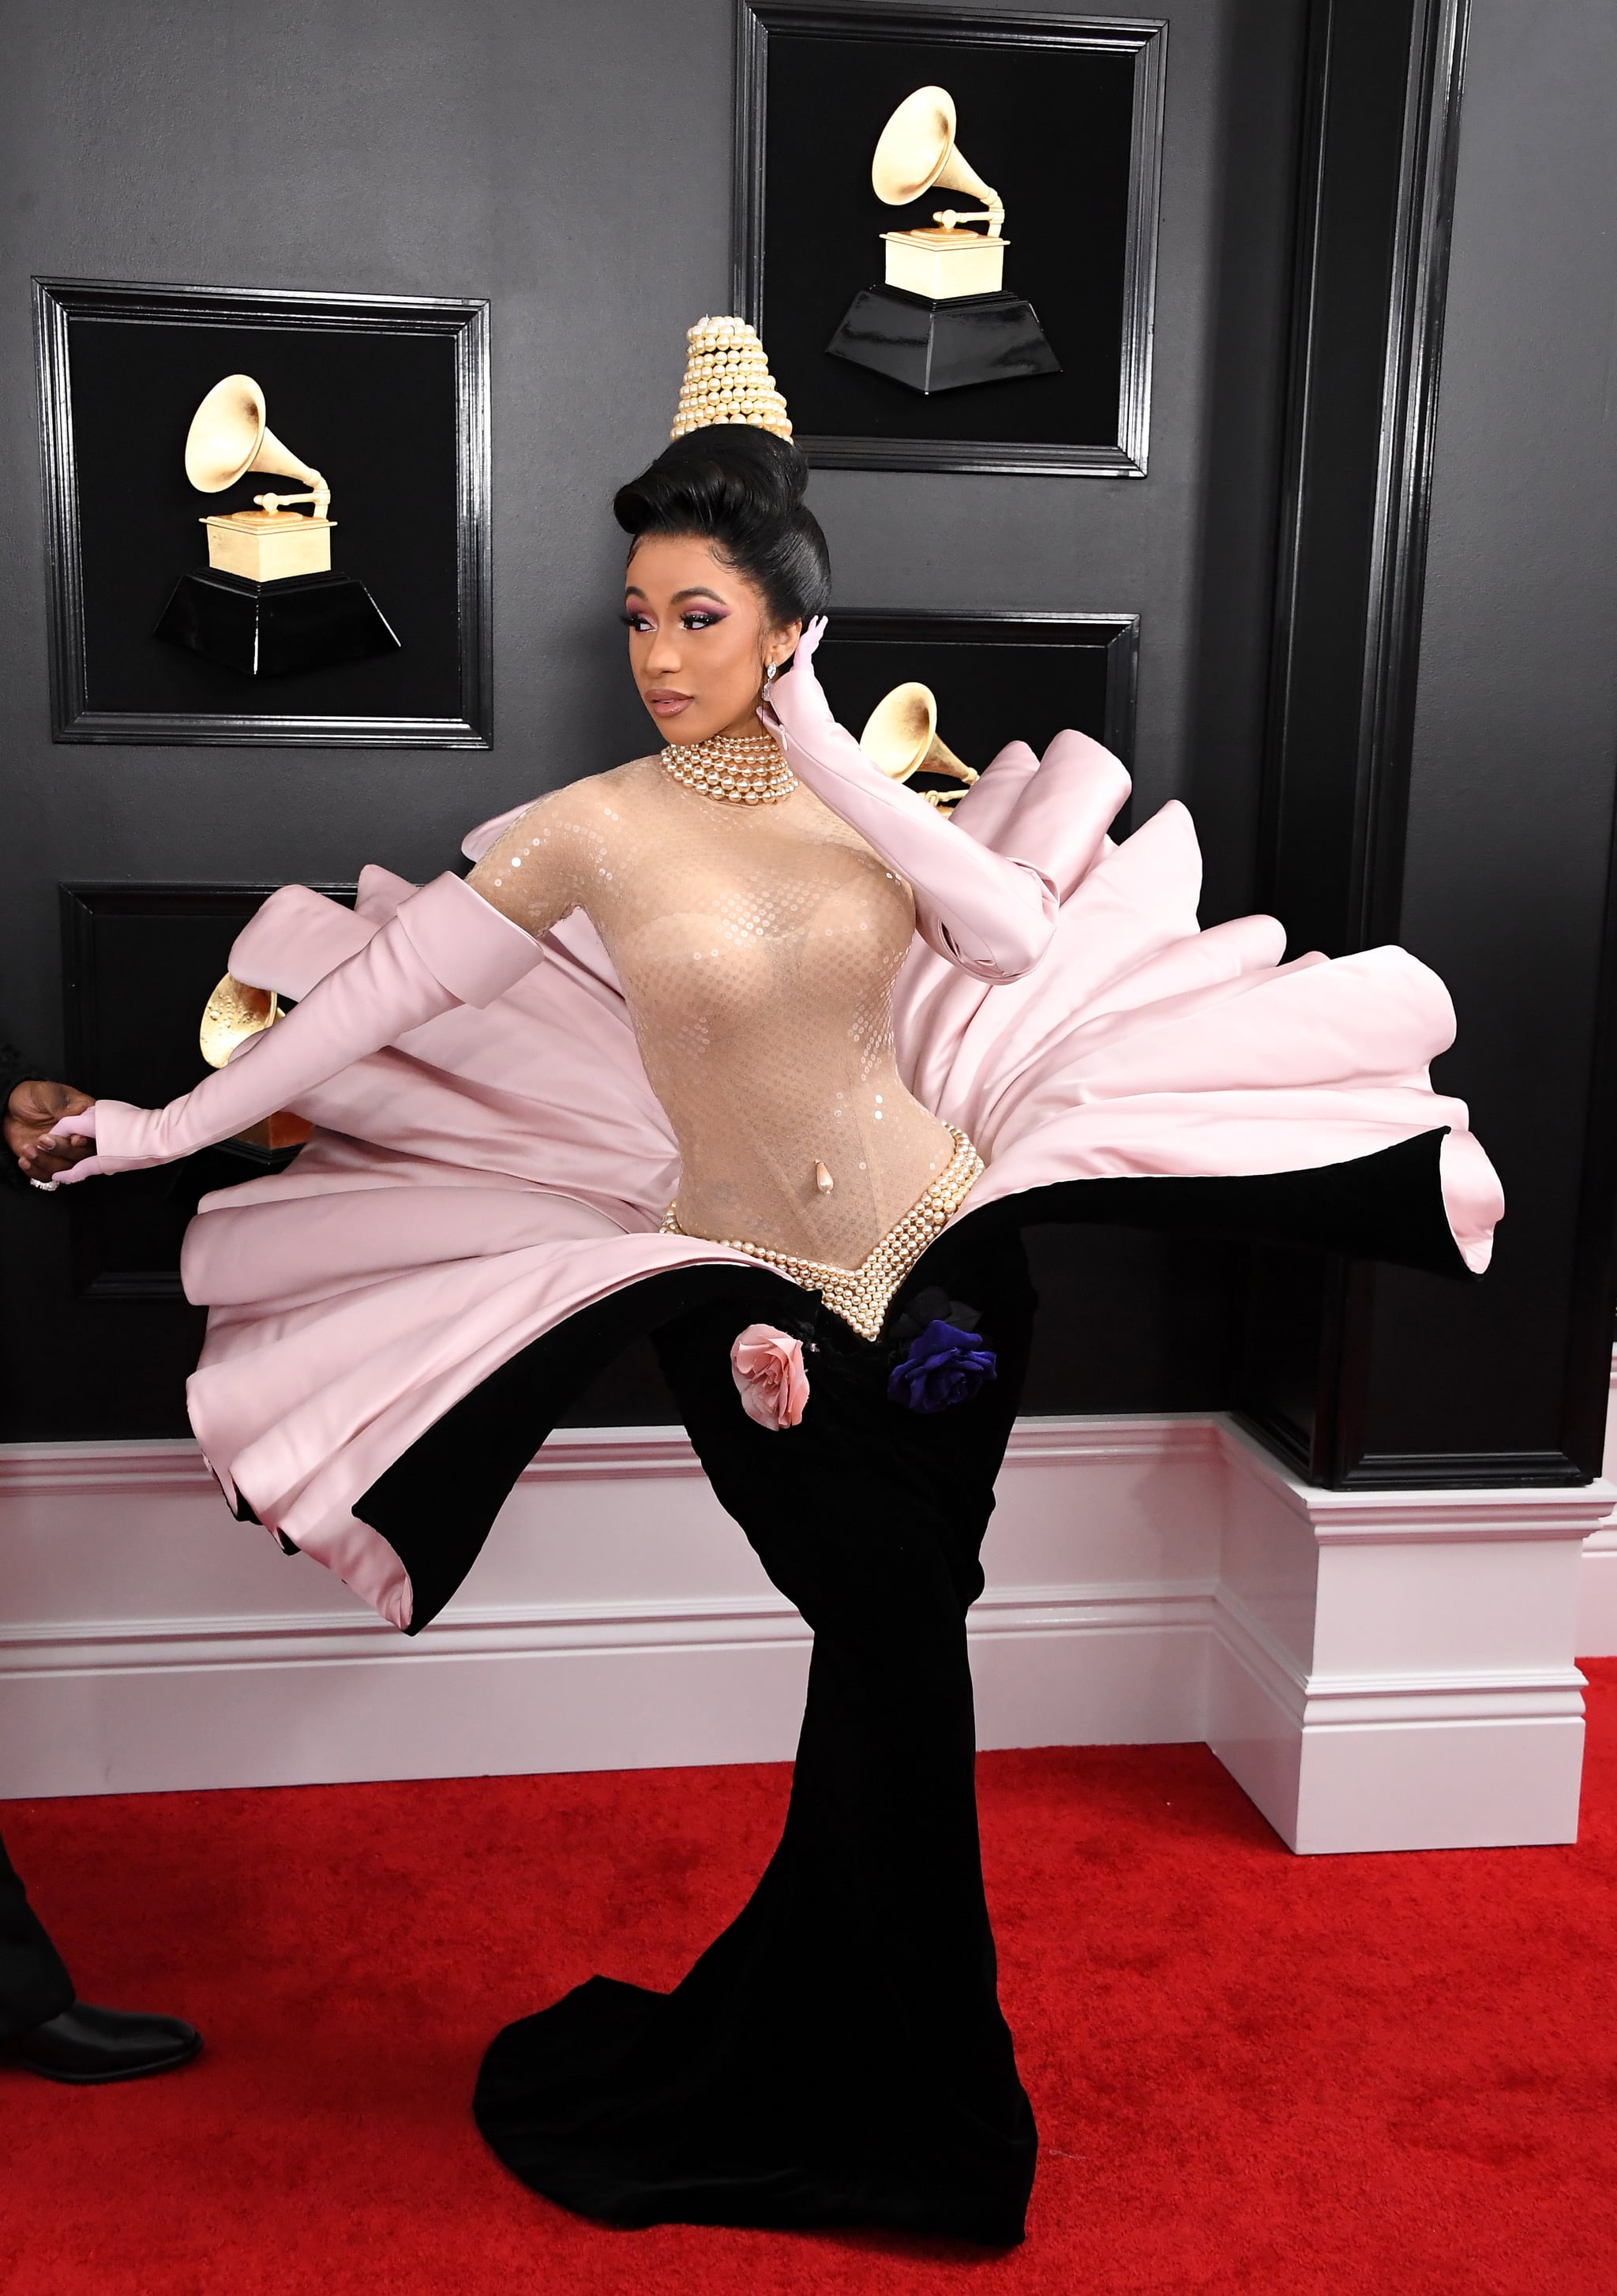 All eyes were on Cardi B when she arrived at the 2019 ceremony.